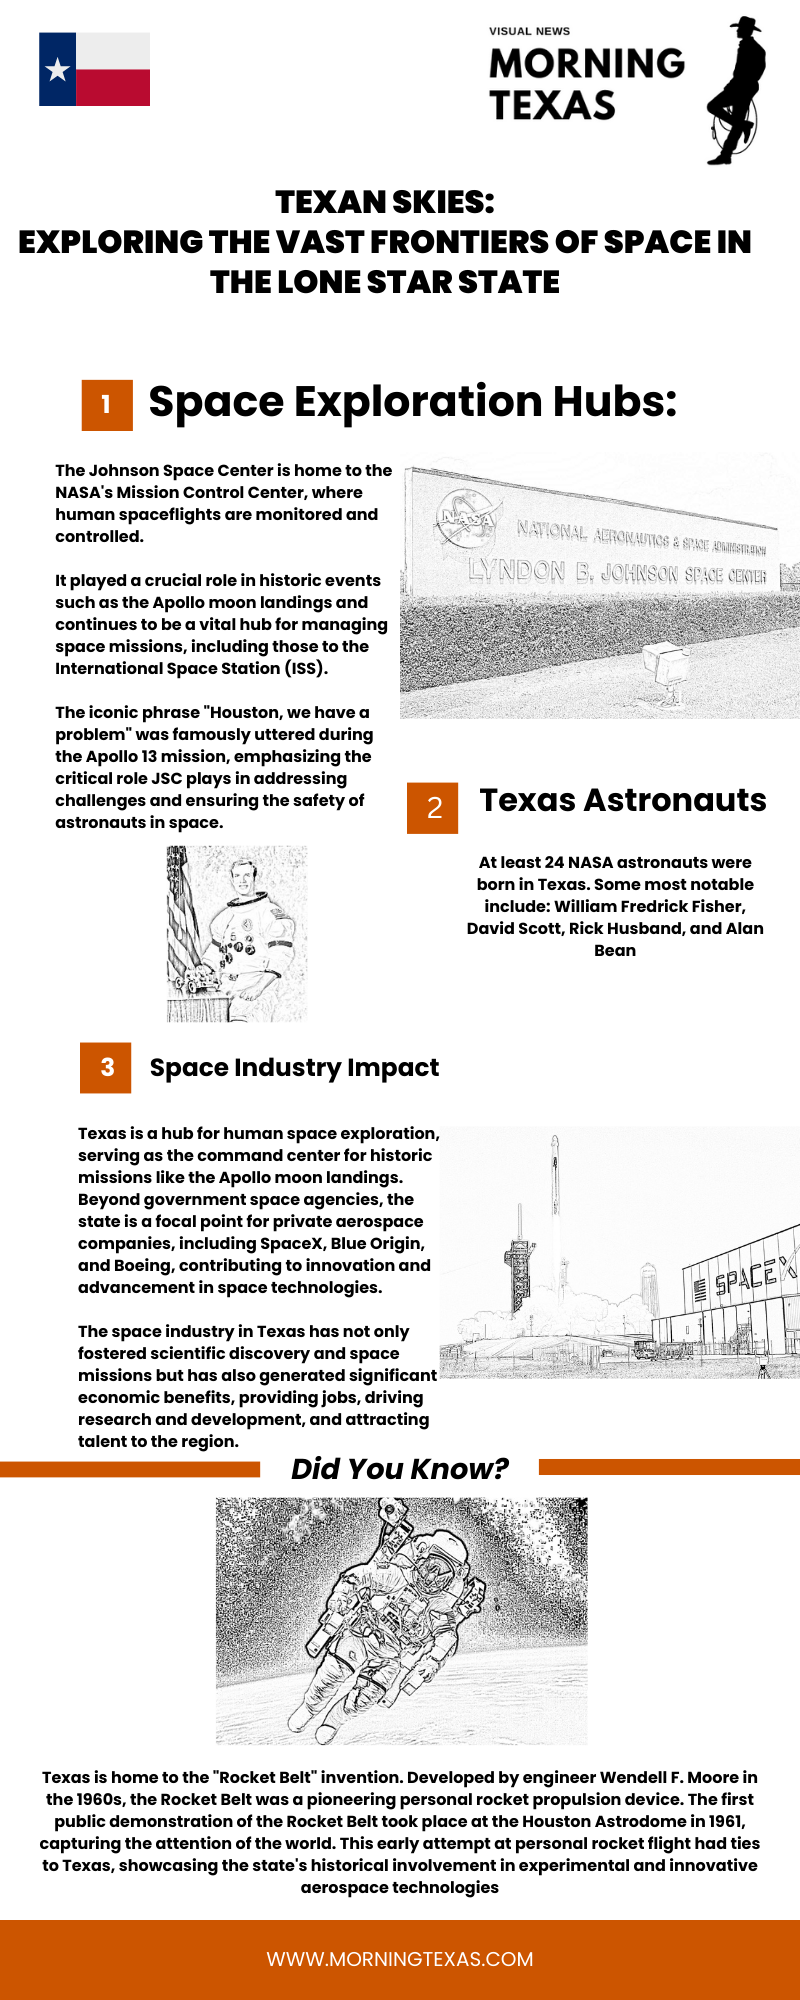 Texas Skies Infographic by Morning Texas